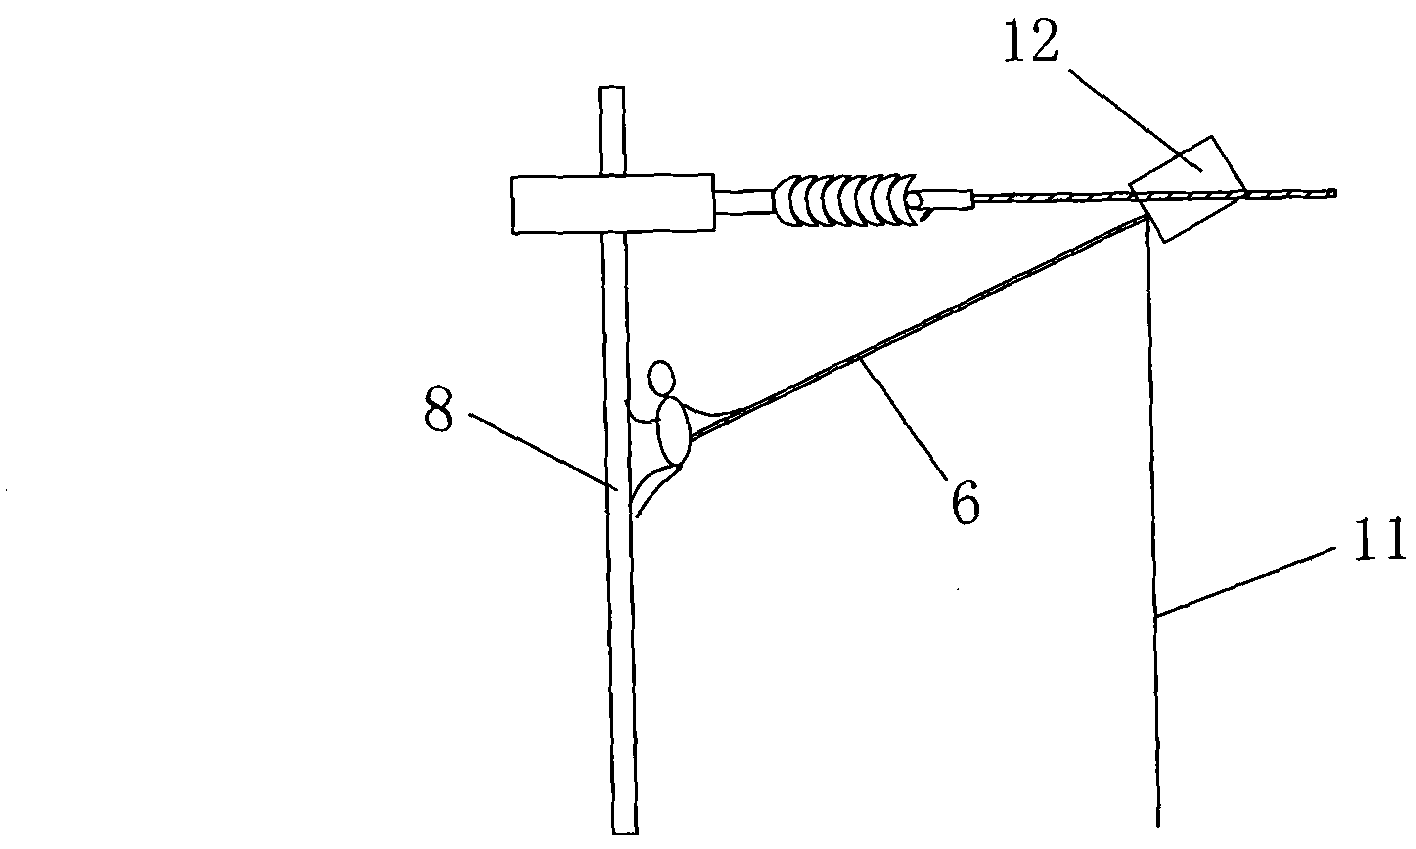 Diverter for grounding wire